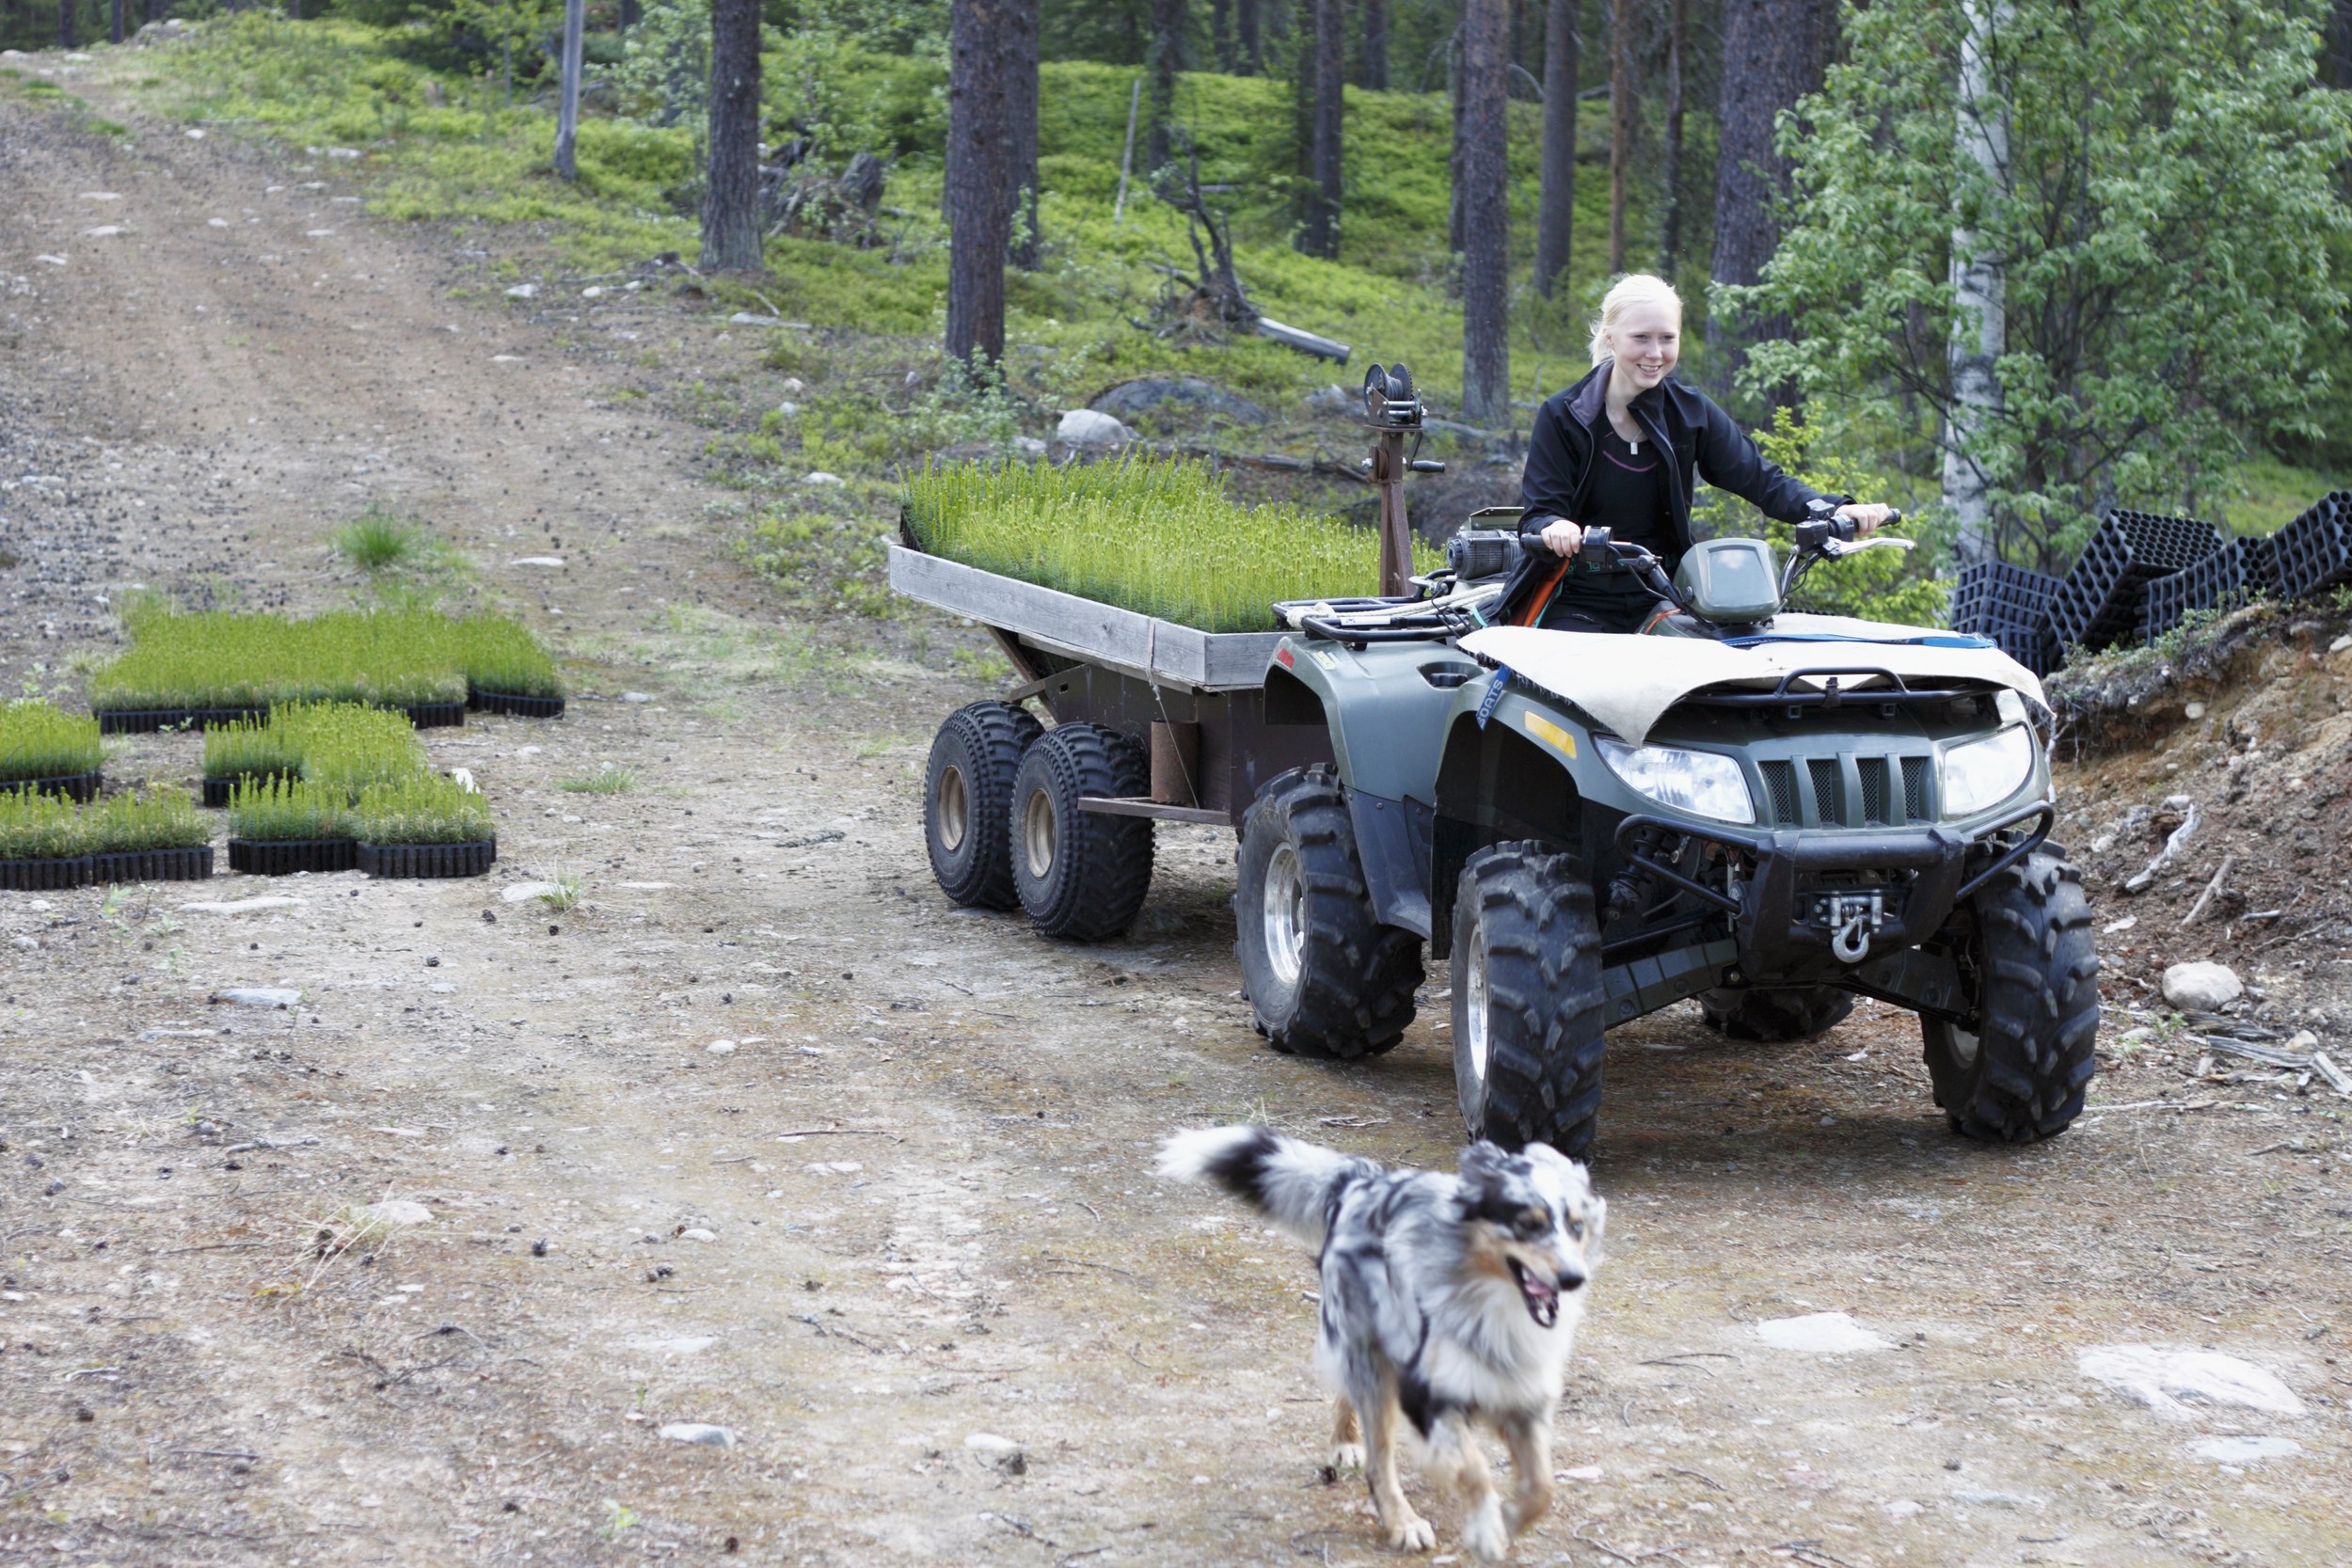 Woman on quad bike with dog running next to her